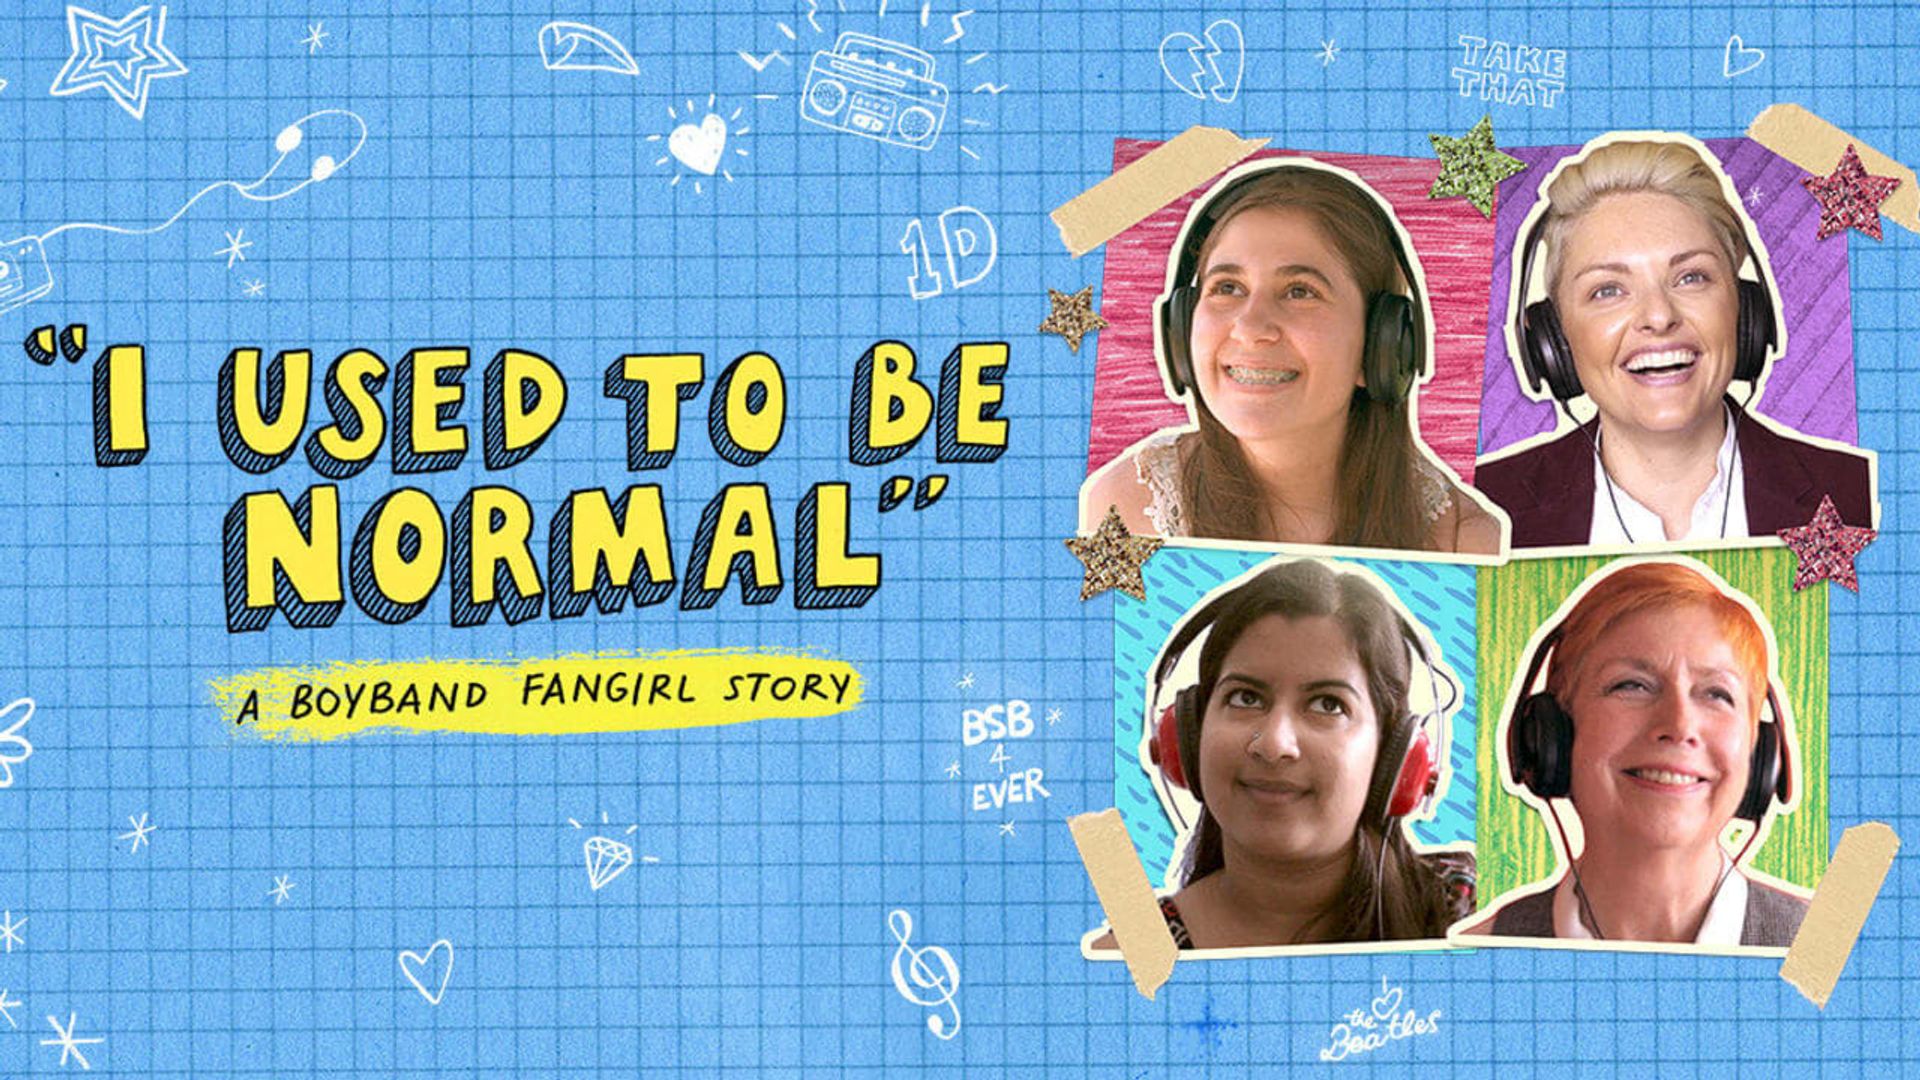 I Used to Be Normal: A Boyband Fangirl Story background